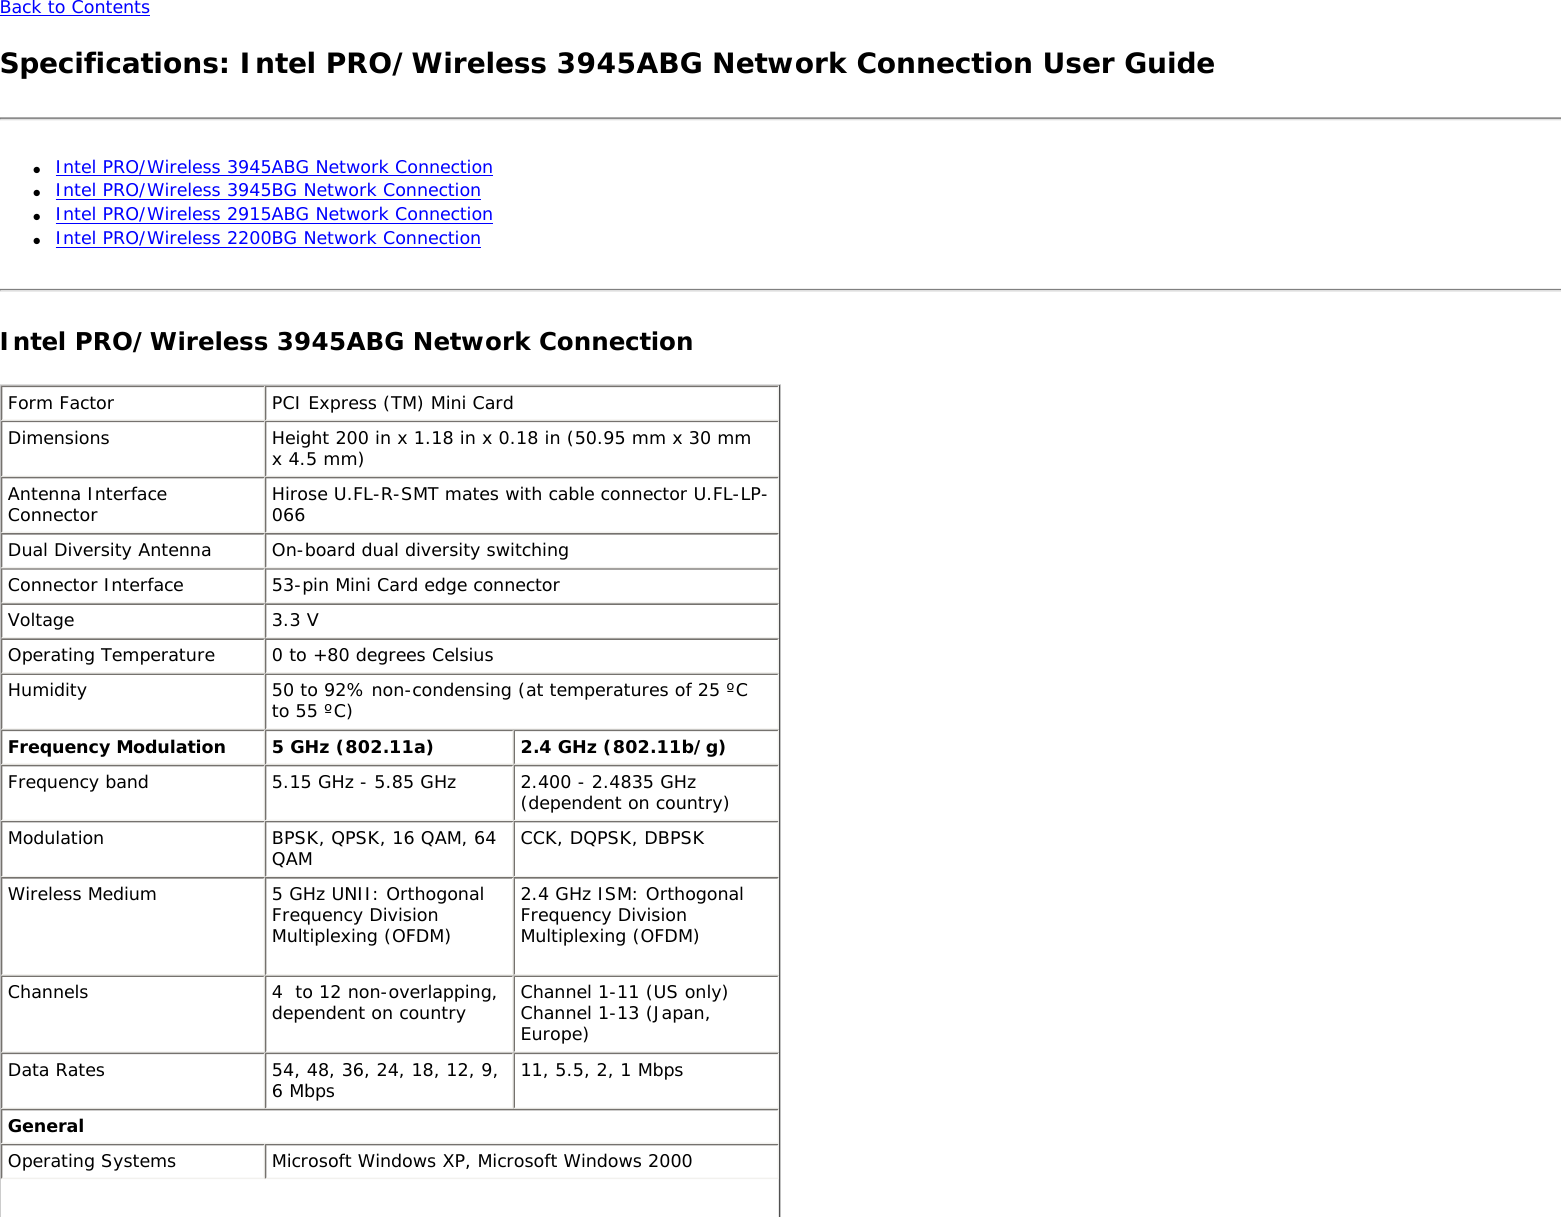 Back to Contents Specifications: Intel PRO/Wireless 3945ABG Network Connection User Guide●     Intel PRO/Wireless 3945ABG Network Connection●     Intel PRO/Wireless 3945BG Network Connection●     Intel PRO/Wireless 2915ABG Network Connection●     Intel PRO/Wireless 2200BG Network ConnectionIntel PRO/Wireless 3945ABG Network ConnectionForm Factor PCI Express (TM) Mini Card Dimensions Height 200 in x 1.18 in x 0.18 in (50.95 mm x 30 mm x 4.5 mm) Antenna Interface Connector Hirose U.FL-R-SMT mates with cable connector U.FL-LP-066 Dual Diversity Antenna On-board dual diversity switching Connector Interface 53-pin Mini Card edge connector Voltage 3.3 V Operating Temperature 0 to +80 degrees Celsius Humidity 50 to 92% non-condensing (at temperatures of 25 ºC to 55 ºC) Frequency Modulation 5 GHz (802.11a) 2.4 GHz (802.11b/g) Frequency band 5.15 GHz - 5.85 GHz 2.400 - 2.4835 GHz (dependent on country)Modulation BPSK, QPSK, 16 QAM, 64 QAM CCK, DQPSK, DBPSKWireless Medium 5 GHz UNII: Orthogonal Frequency Division Multiplexing (OFDM)  2.4 GHz ISM: Orthogonal Frequency Division Multiplexing (OFDM)Channels 4  to 12 non-overlapping, dependent on country Channel 1-11 (US only) Channel 1-13 (Japan, Europe)Data Rates 54, 48, 36, 24, 18, 12, 9, 6 Mbps 11, 5.5, 2, 1 MbpsGeneralOperating Systems Microsoft Windows XP, Microsoft Windows 2000